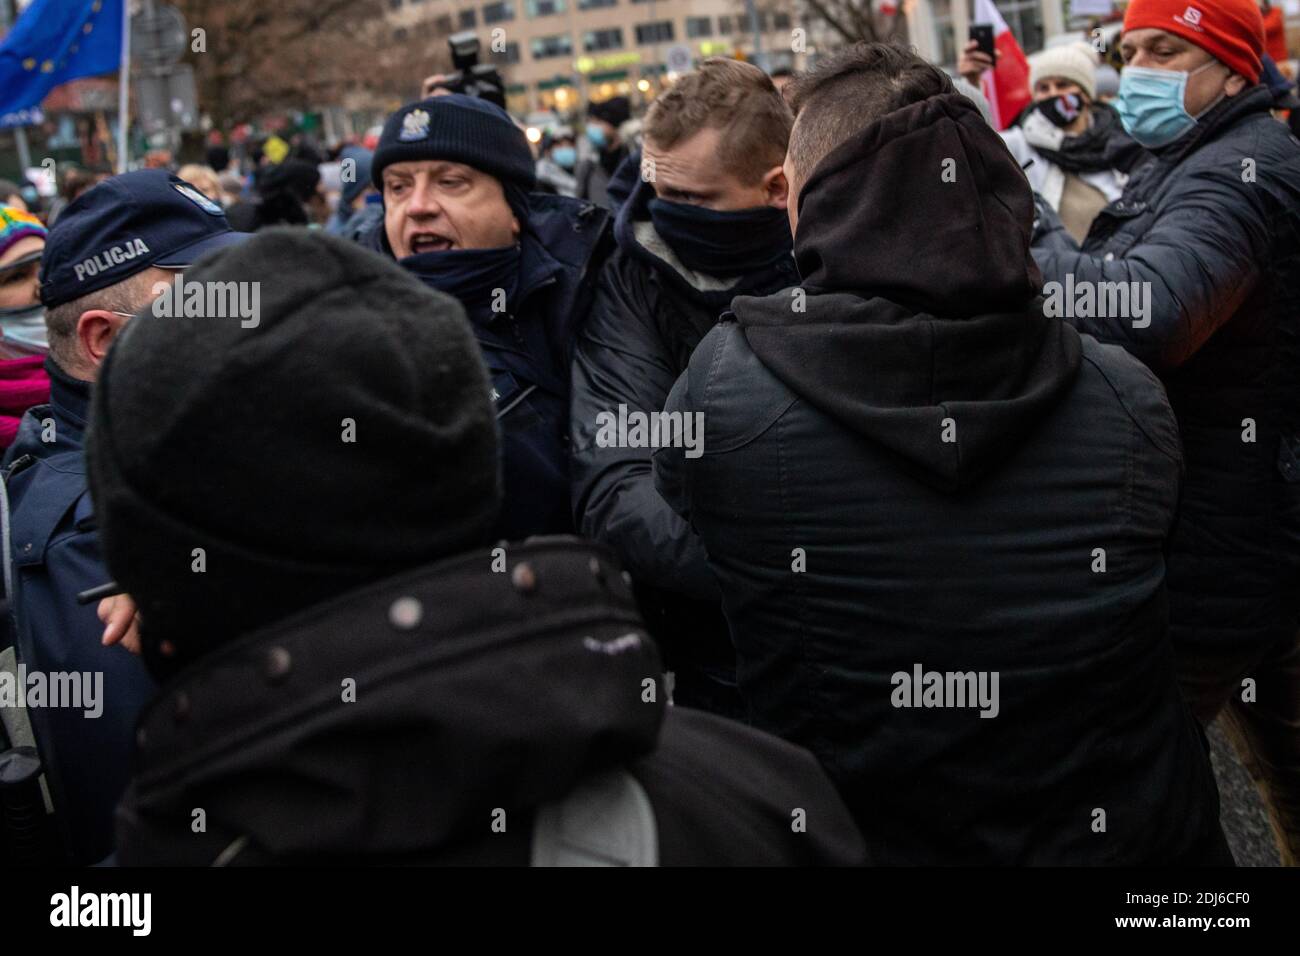 Warsaw, mazowieckie, Poland. 13th Dec, 2020. December 18, 2020, Warsaw, The general strike on December 13, 2020 began at 12.00. On the 39th anniversary of the introduction of martial law in Poland, protests by the largest anti-government circles are taking place in Warsaw. Among others, they protest Women's Strike, Entrepreneurs' Strike and the Eight-Star Movement Credit: Grzegorz Banaszak/ZUMA Wire/Alamy Live News Stock Photo